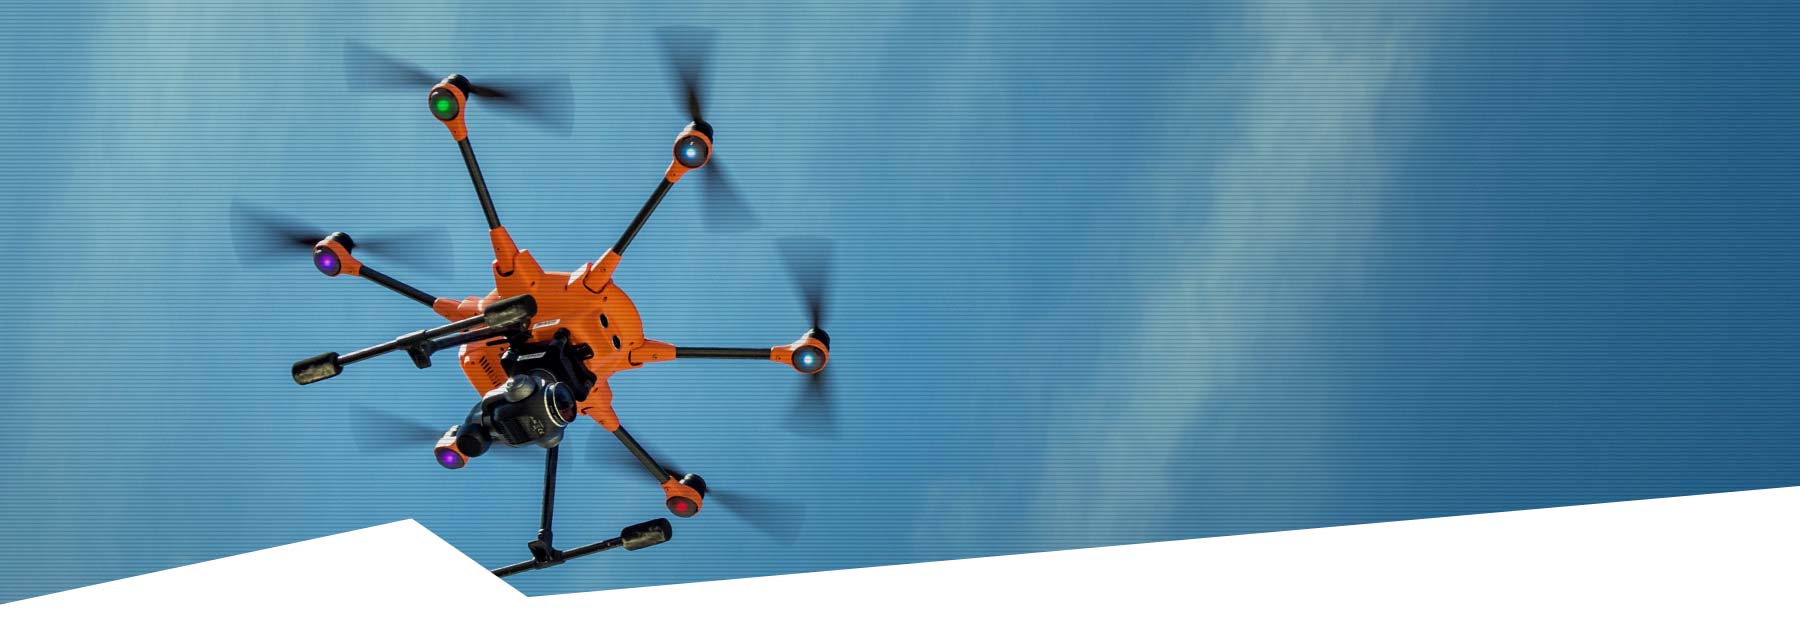 Yuneec H520E RTK Hexacopter drone